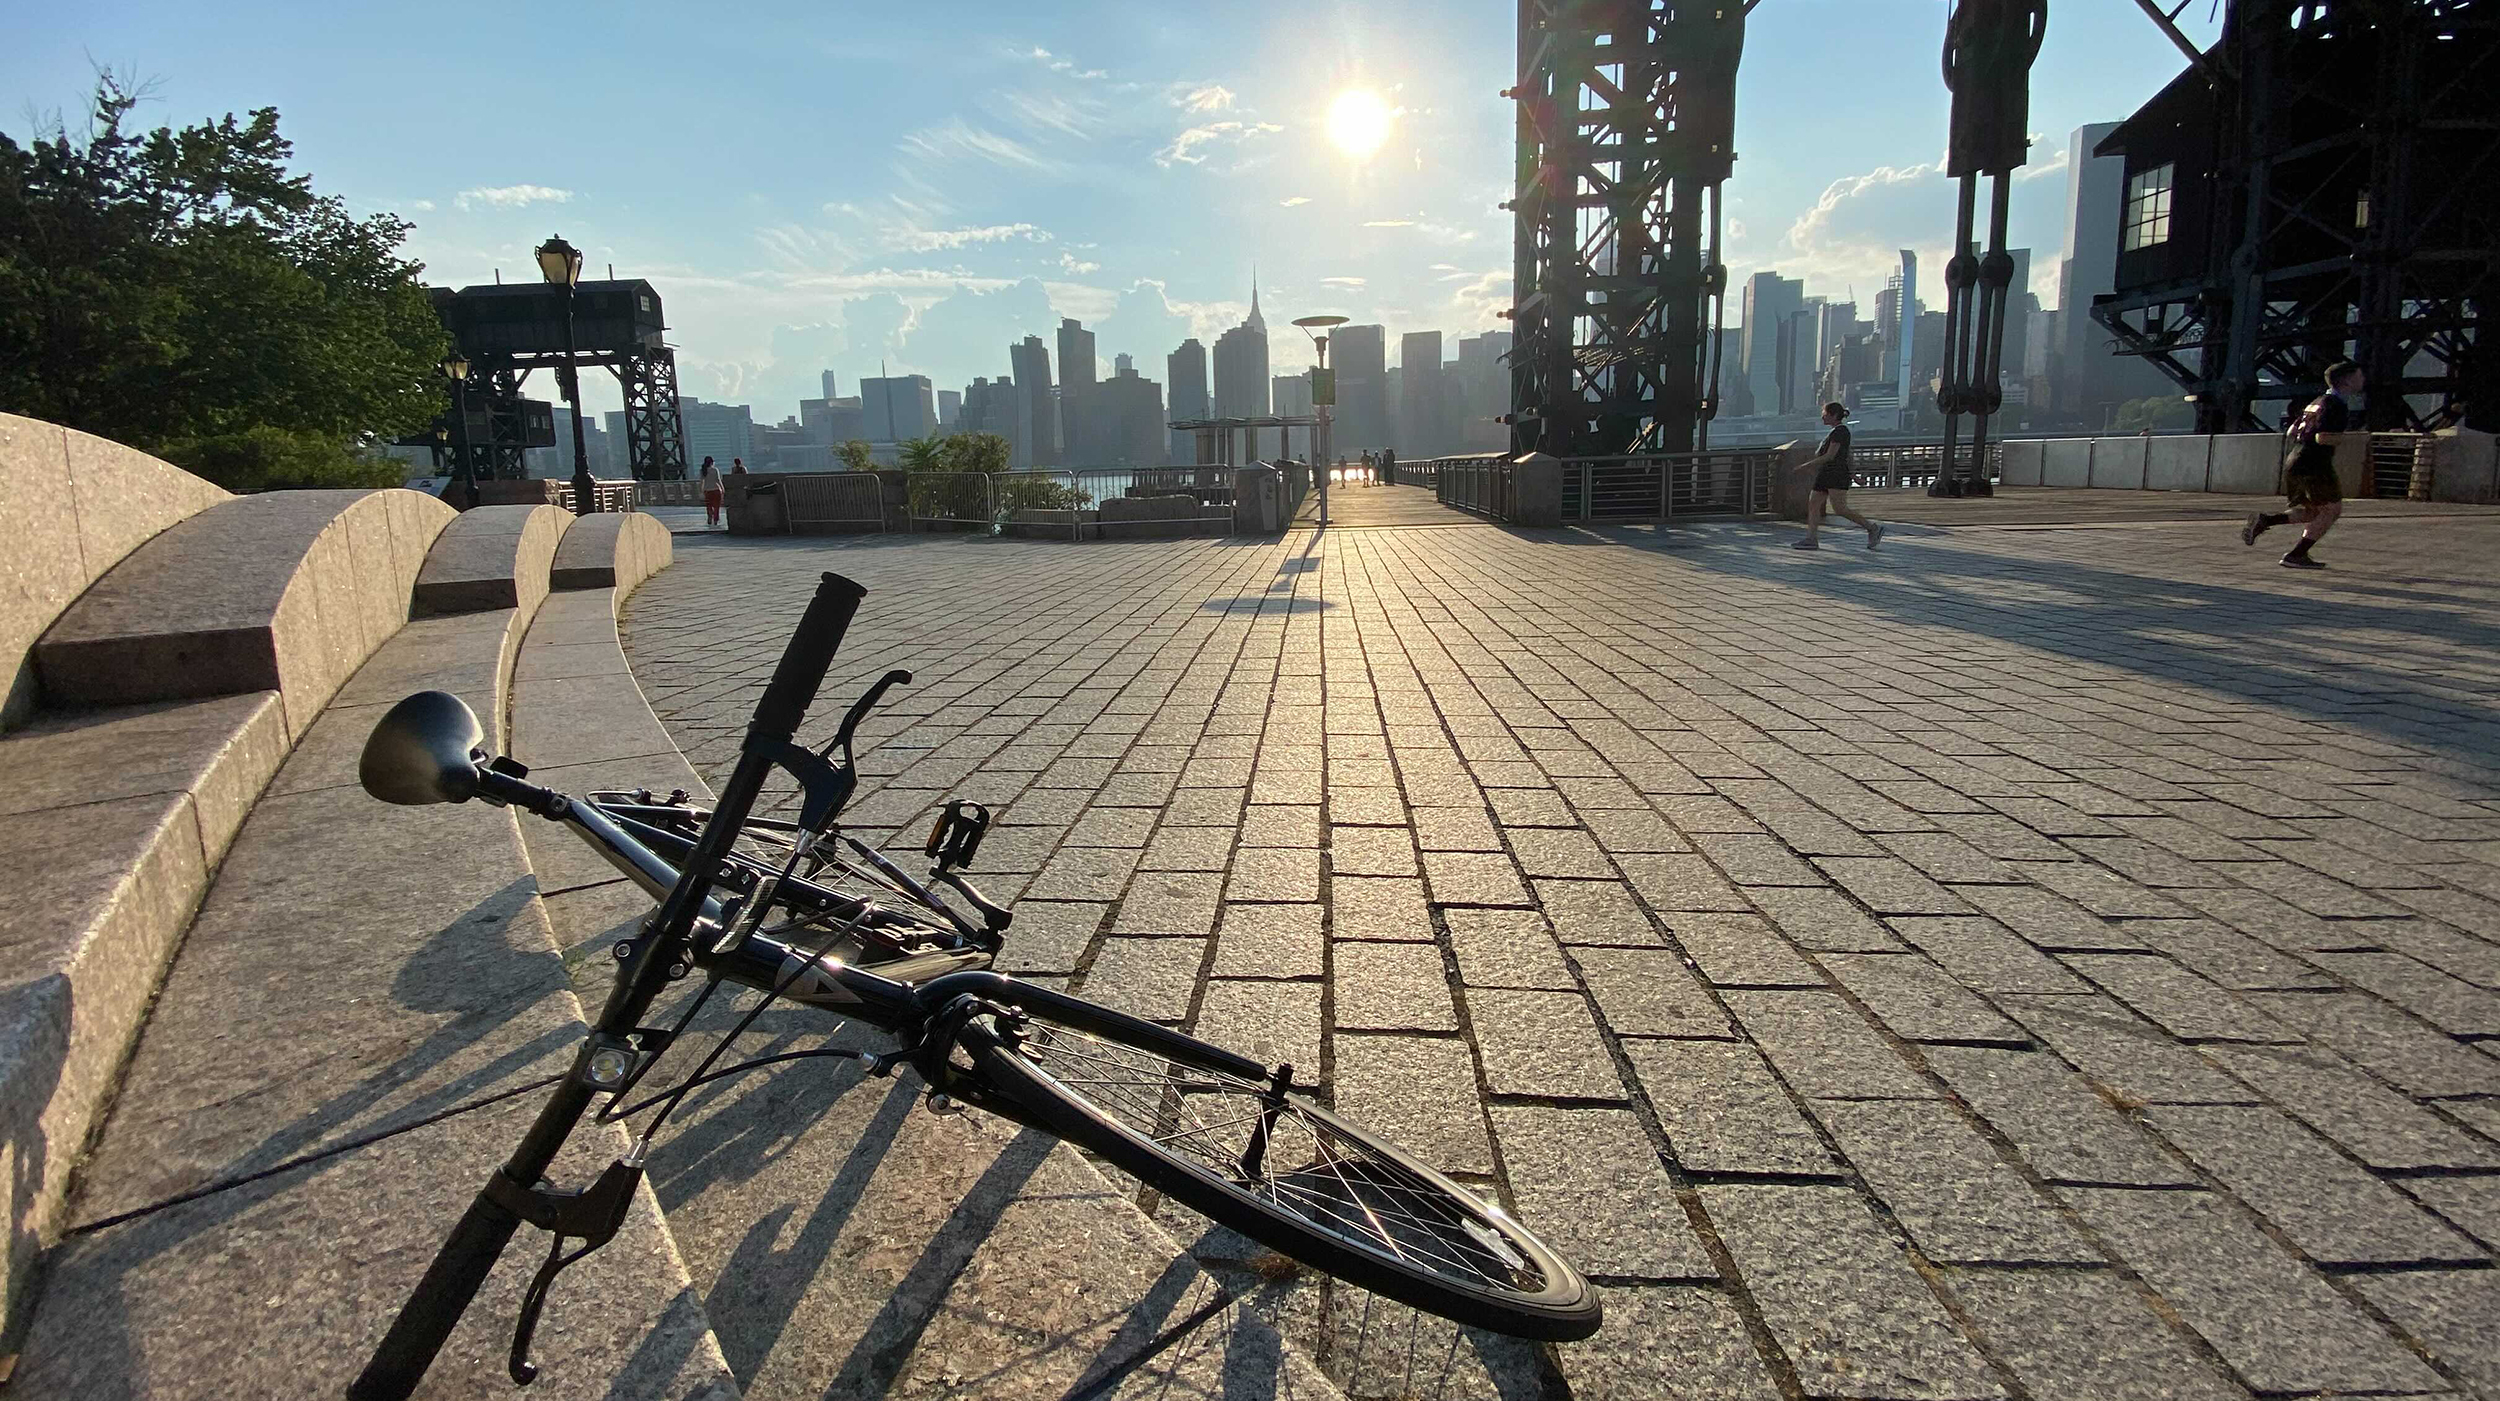 A bike rests by the waterfront in Queens, New York